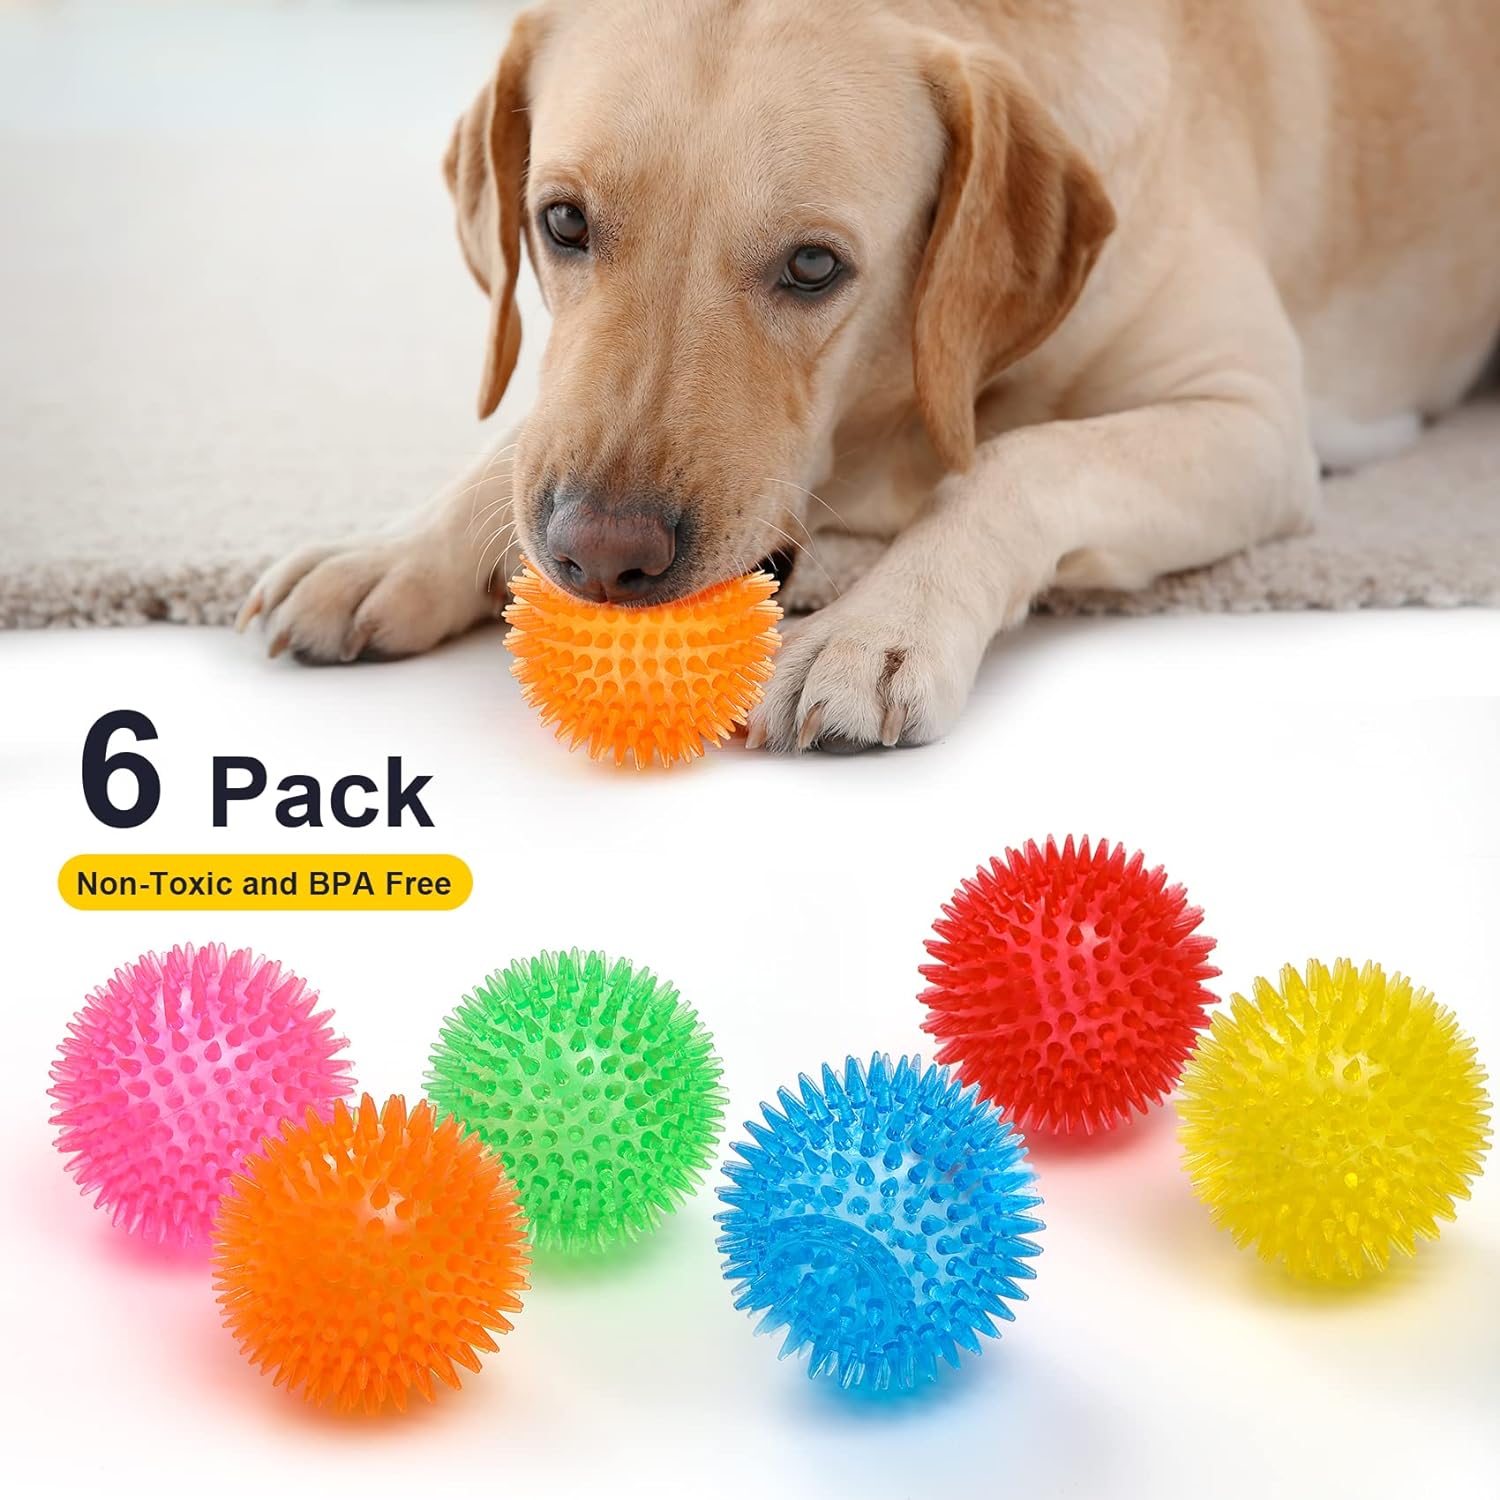 VITEVER 3.5” Squeaky Dog Toy Balls (6 Colors) Puppy Chew Toys for Teething, BPA Free Non-Toxic, Spikey Medium, Large Small Dogs, Durable Aggressive Chewers